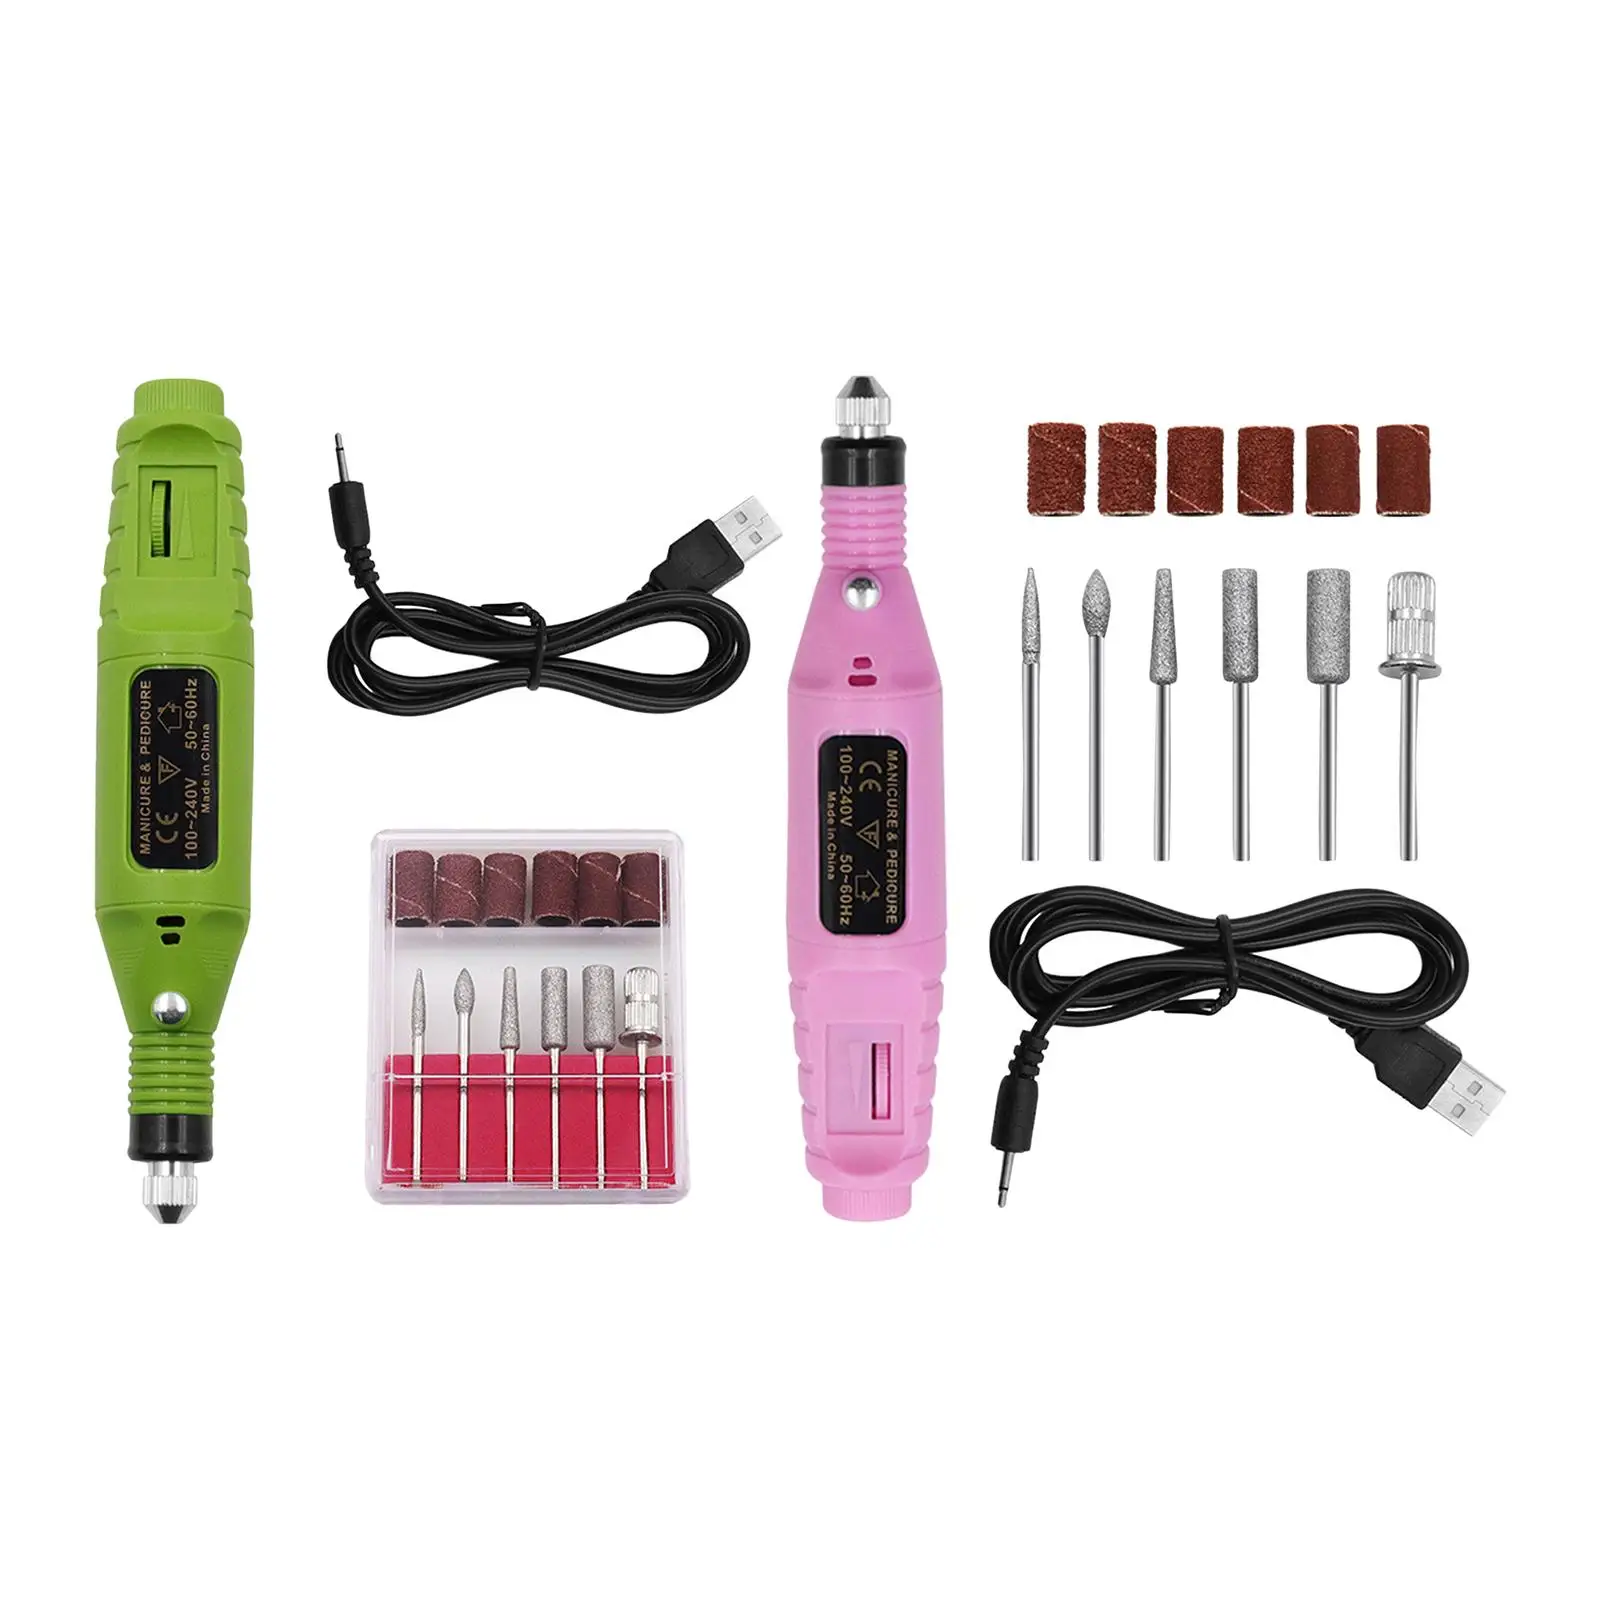 2000RPM Portable Mini Nail Drill Pen Polish Machine Grinder Carver Polisher Sand Bands for Exfoliating Engraving